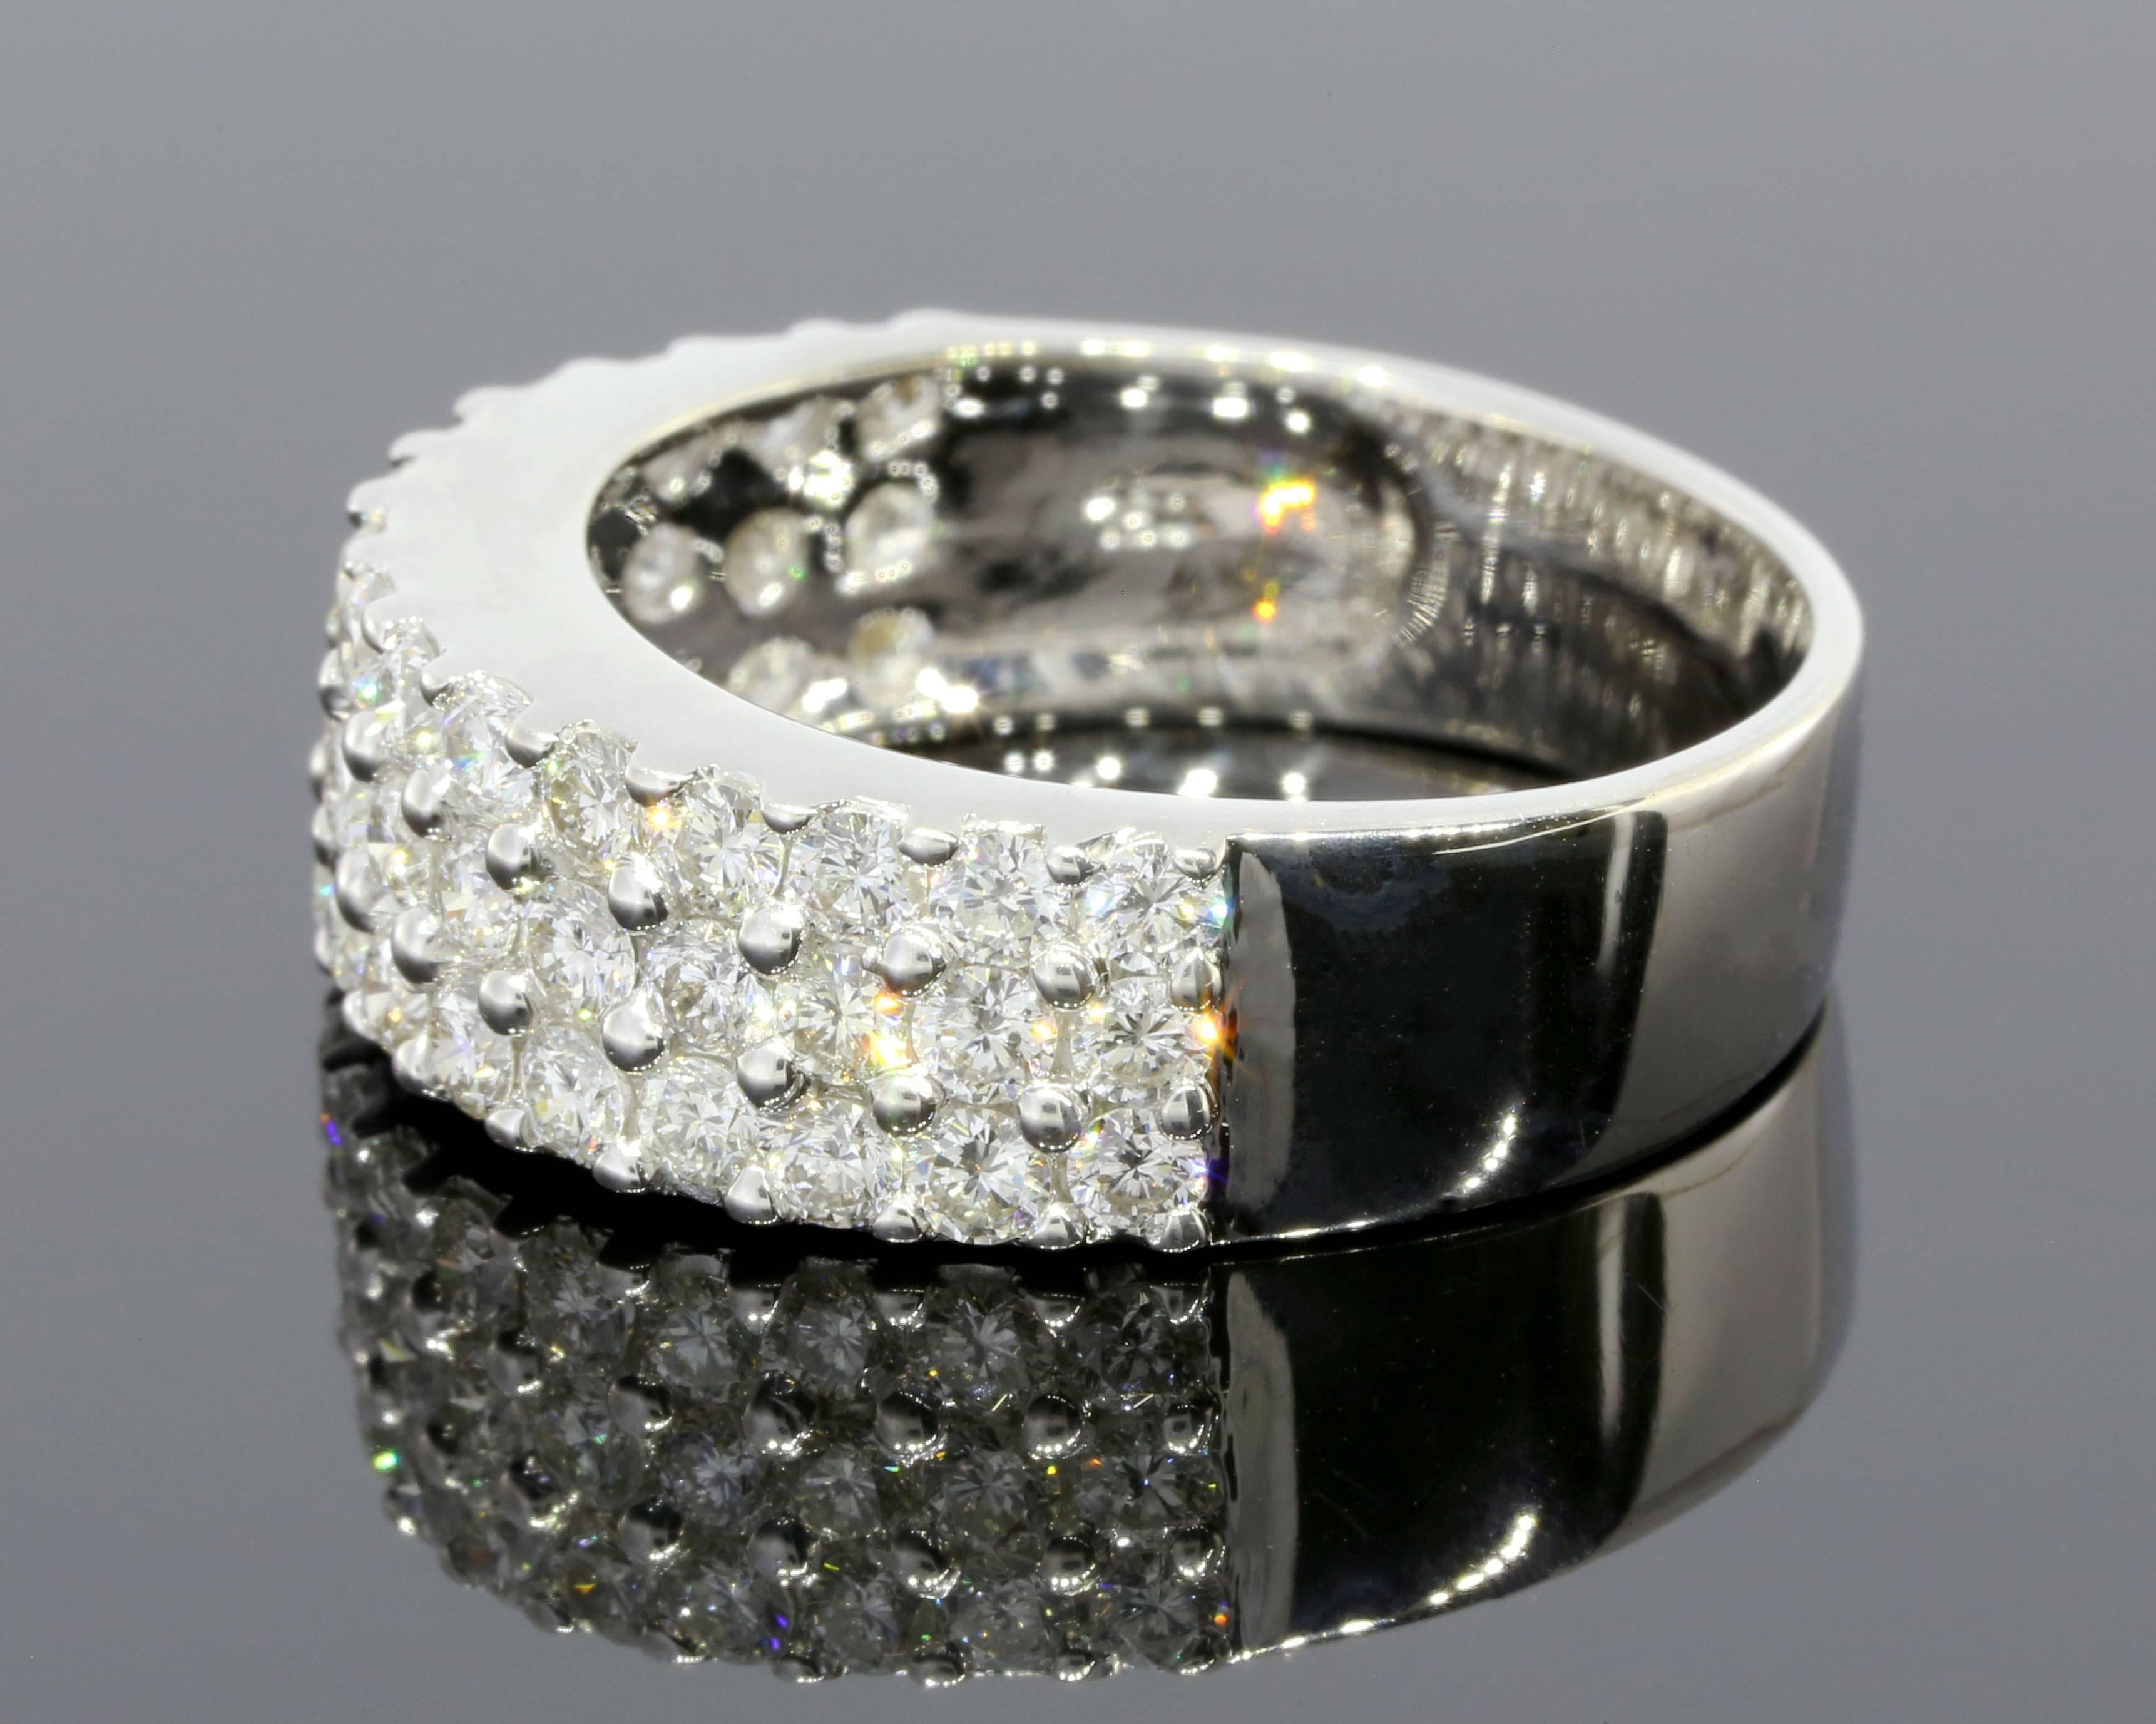 This gorgeous ring has tons of sparkle & is just breathtaking! The ring features 3 rows of shared prong set, round brilliant cut diamonds that have a combined total weight of 2.25 carats. These beautiful diamonds grade as GH/VS2-SI2 in quality. The